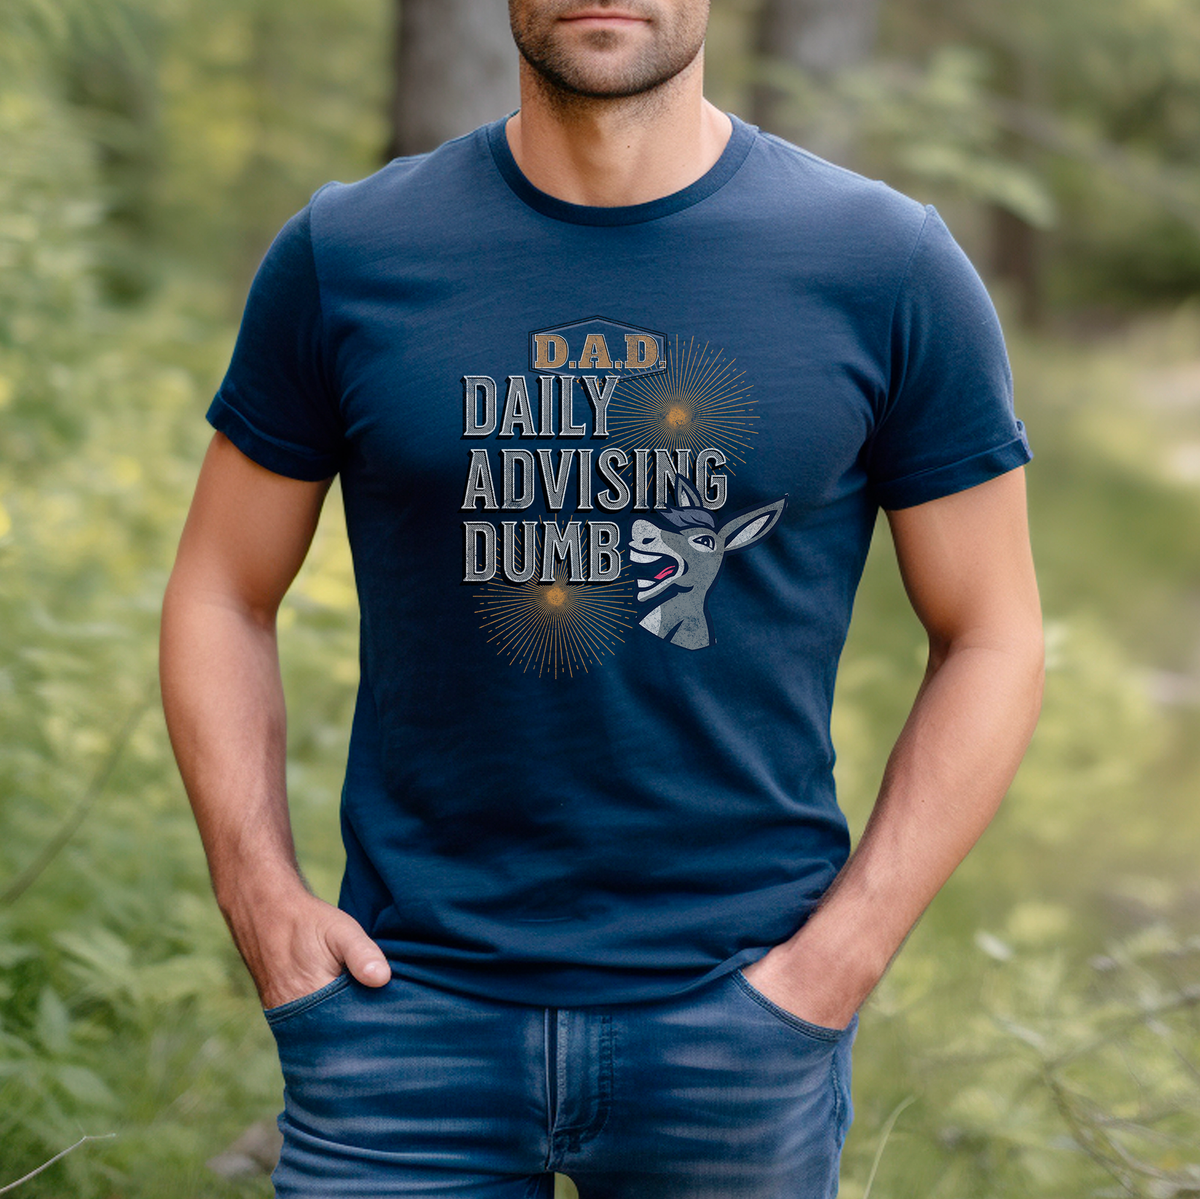 Dad T Shirt Daily Advising Dumb Old Time